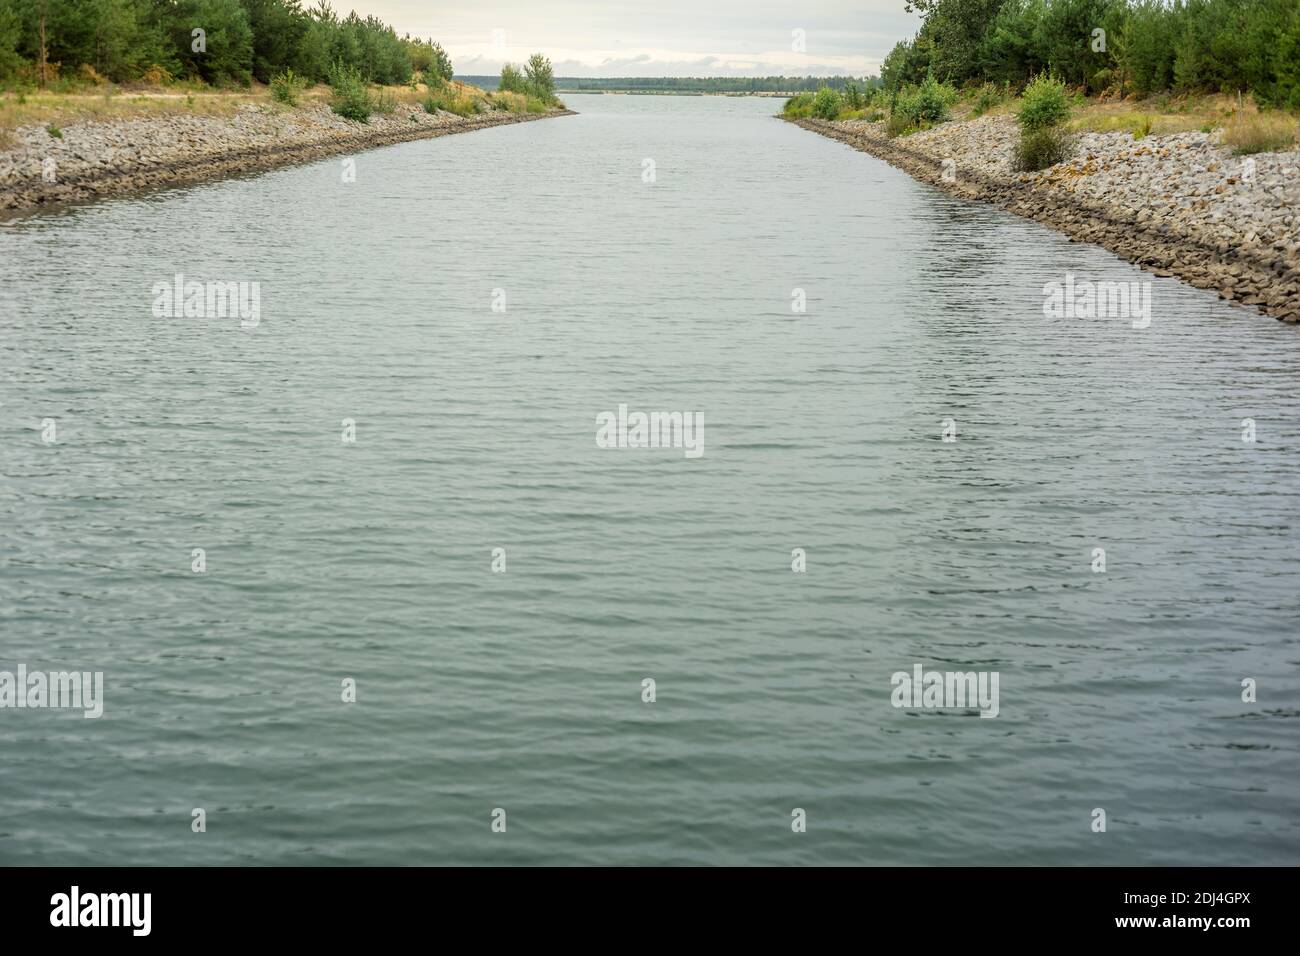 The junction channel between Sedlitzer See and Geierswalder See in Lusatia, Germany 2020. Stock Photo